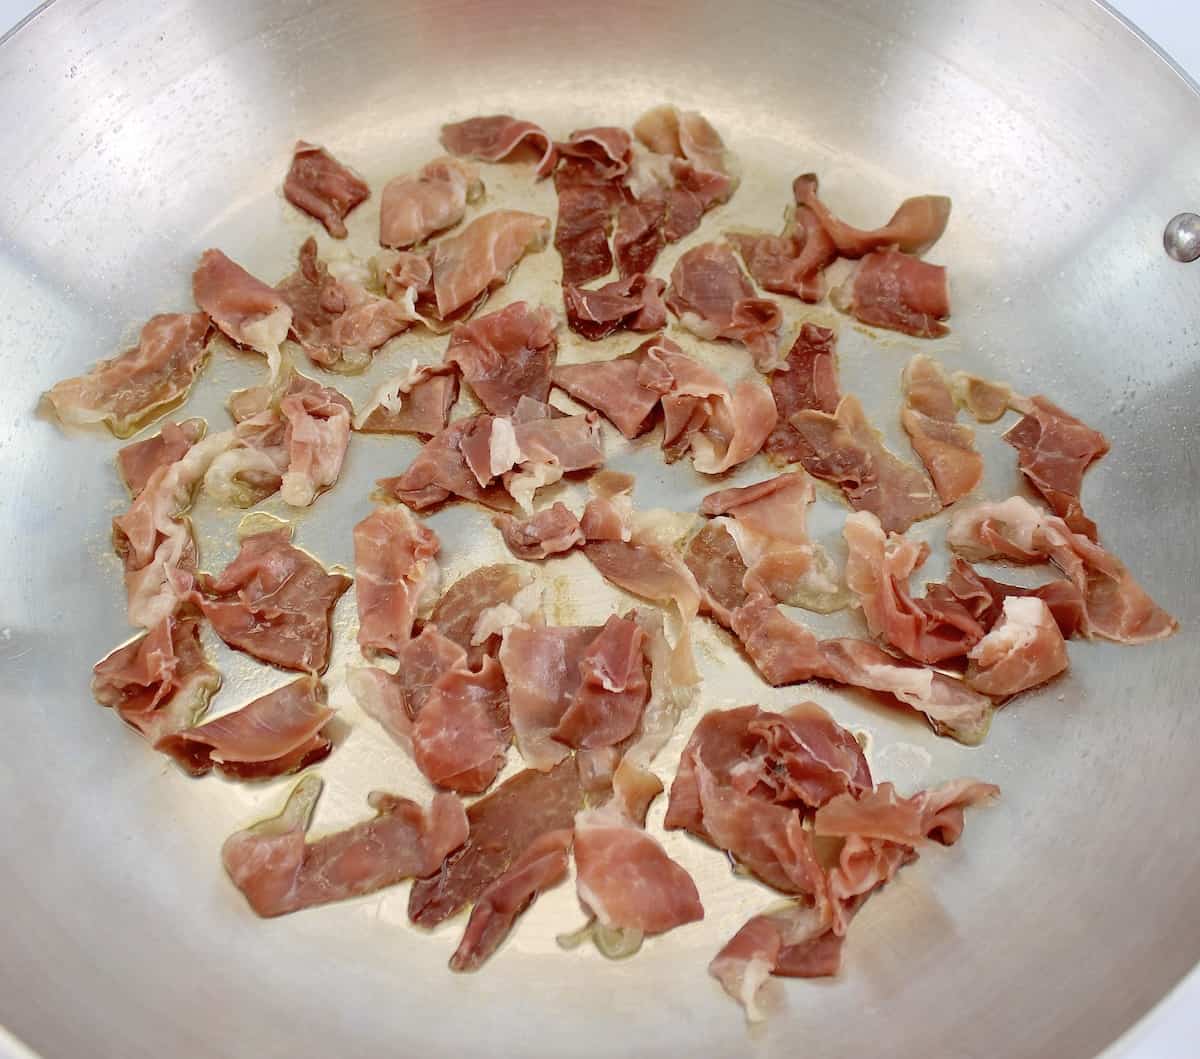 prosciutto being sauteed in skillet